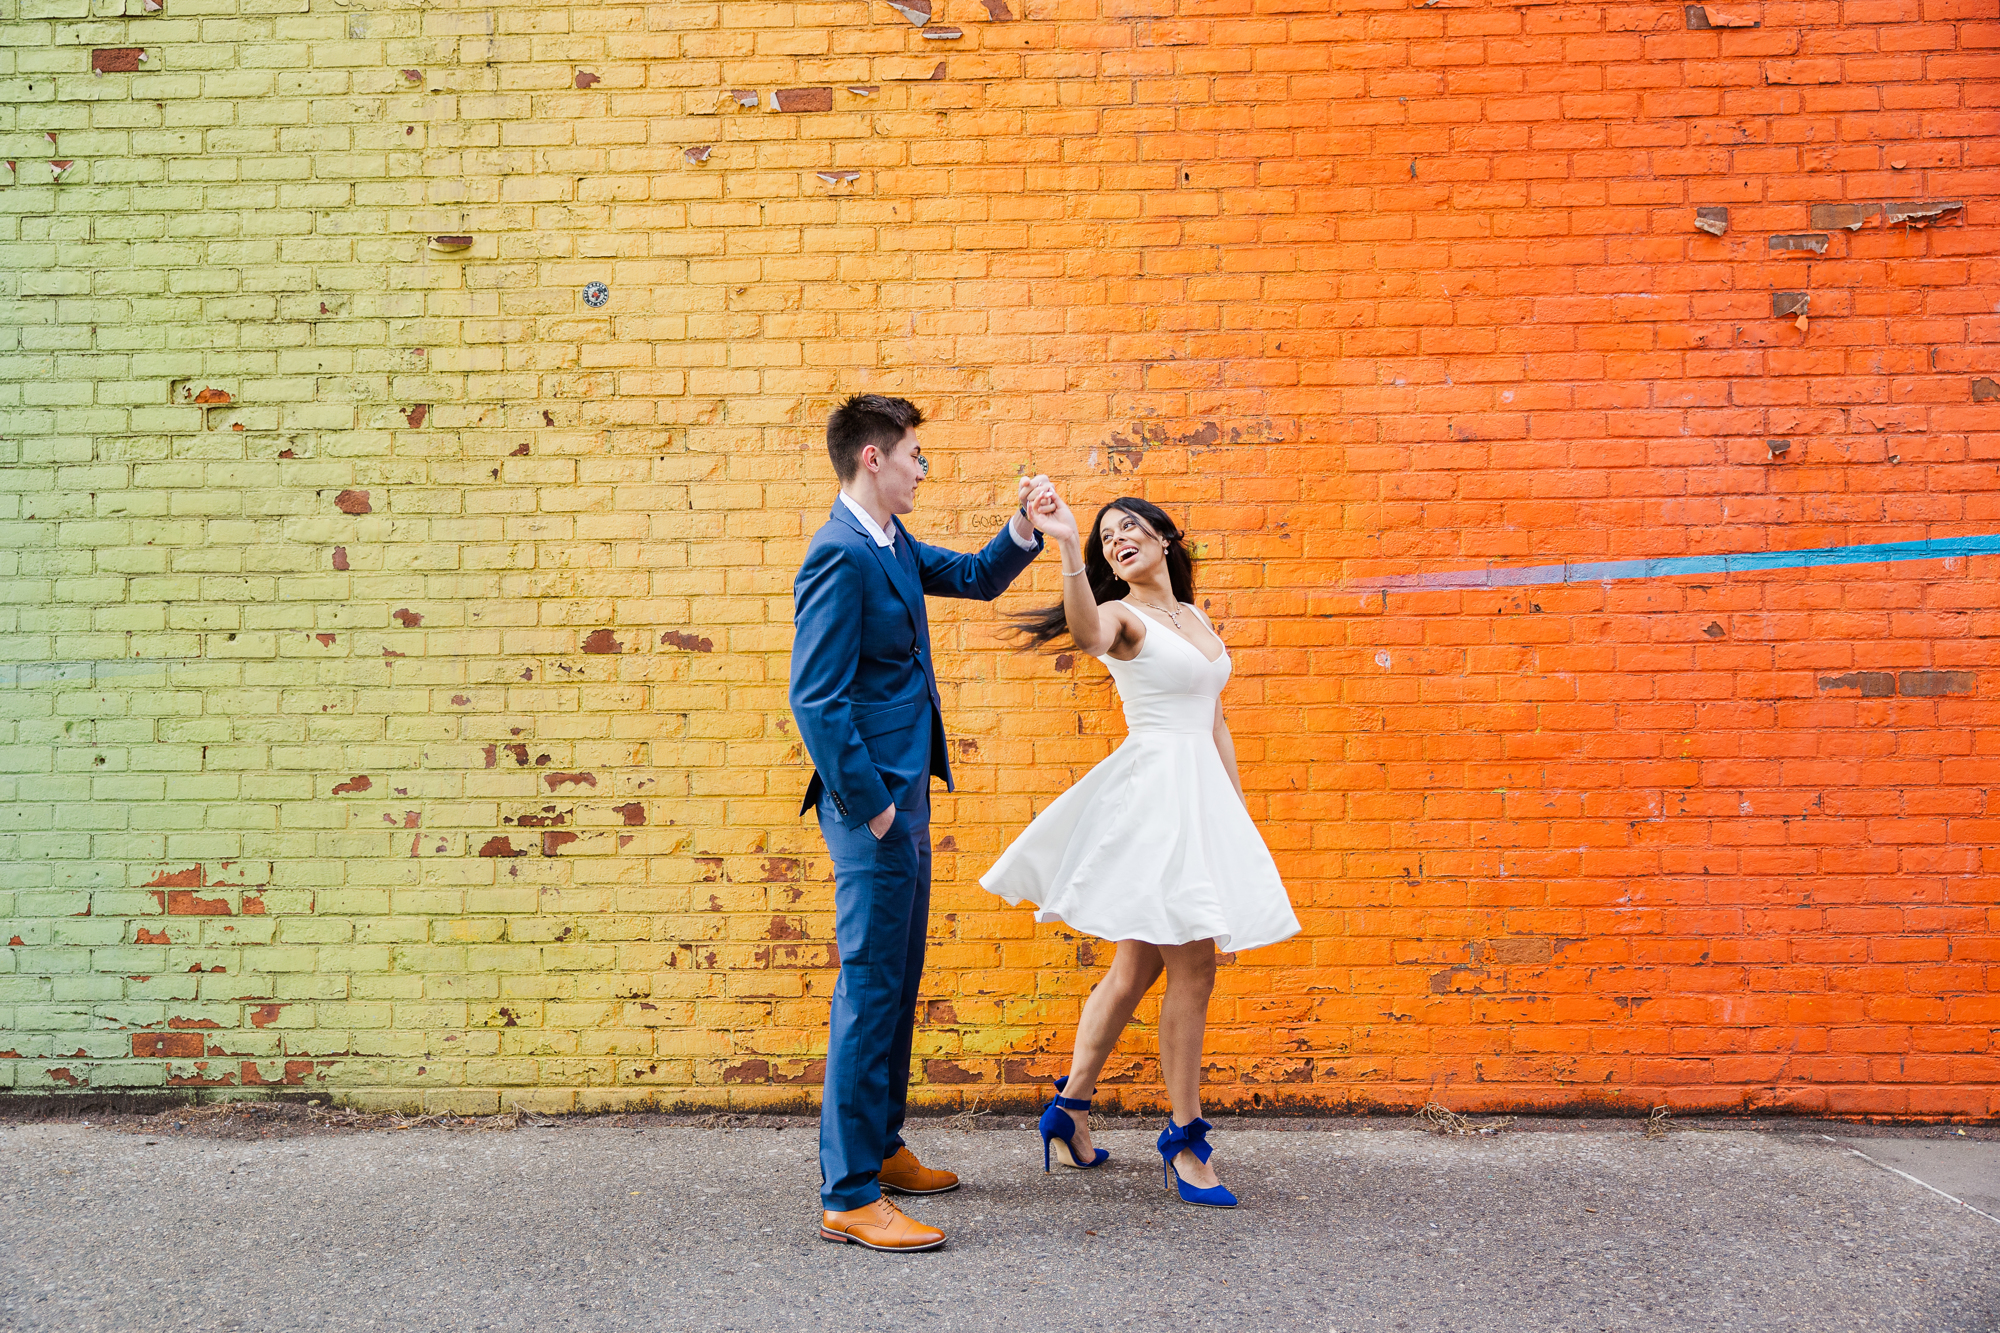 Playful Spring Engagement Photography in DUMBO